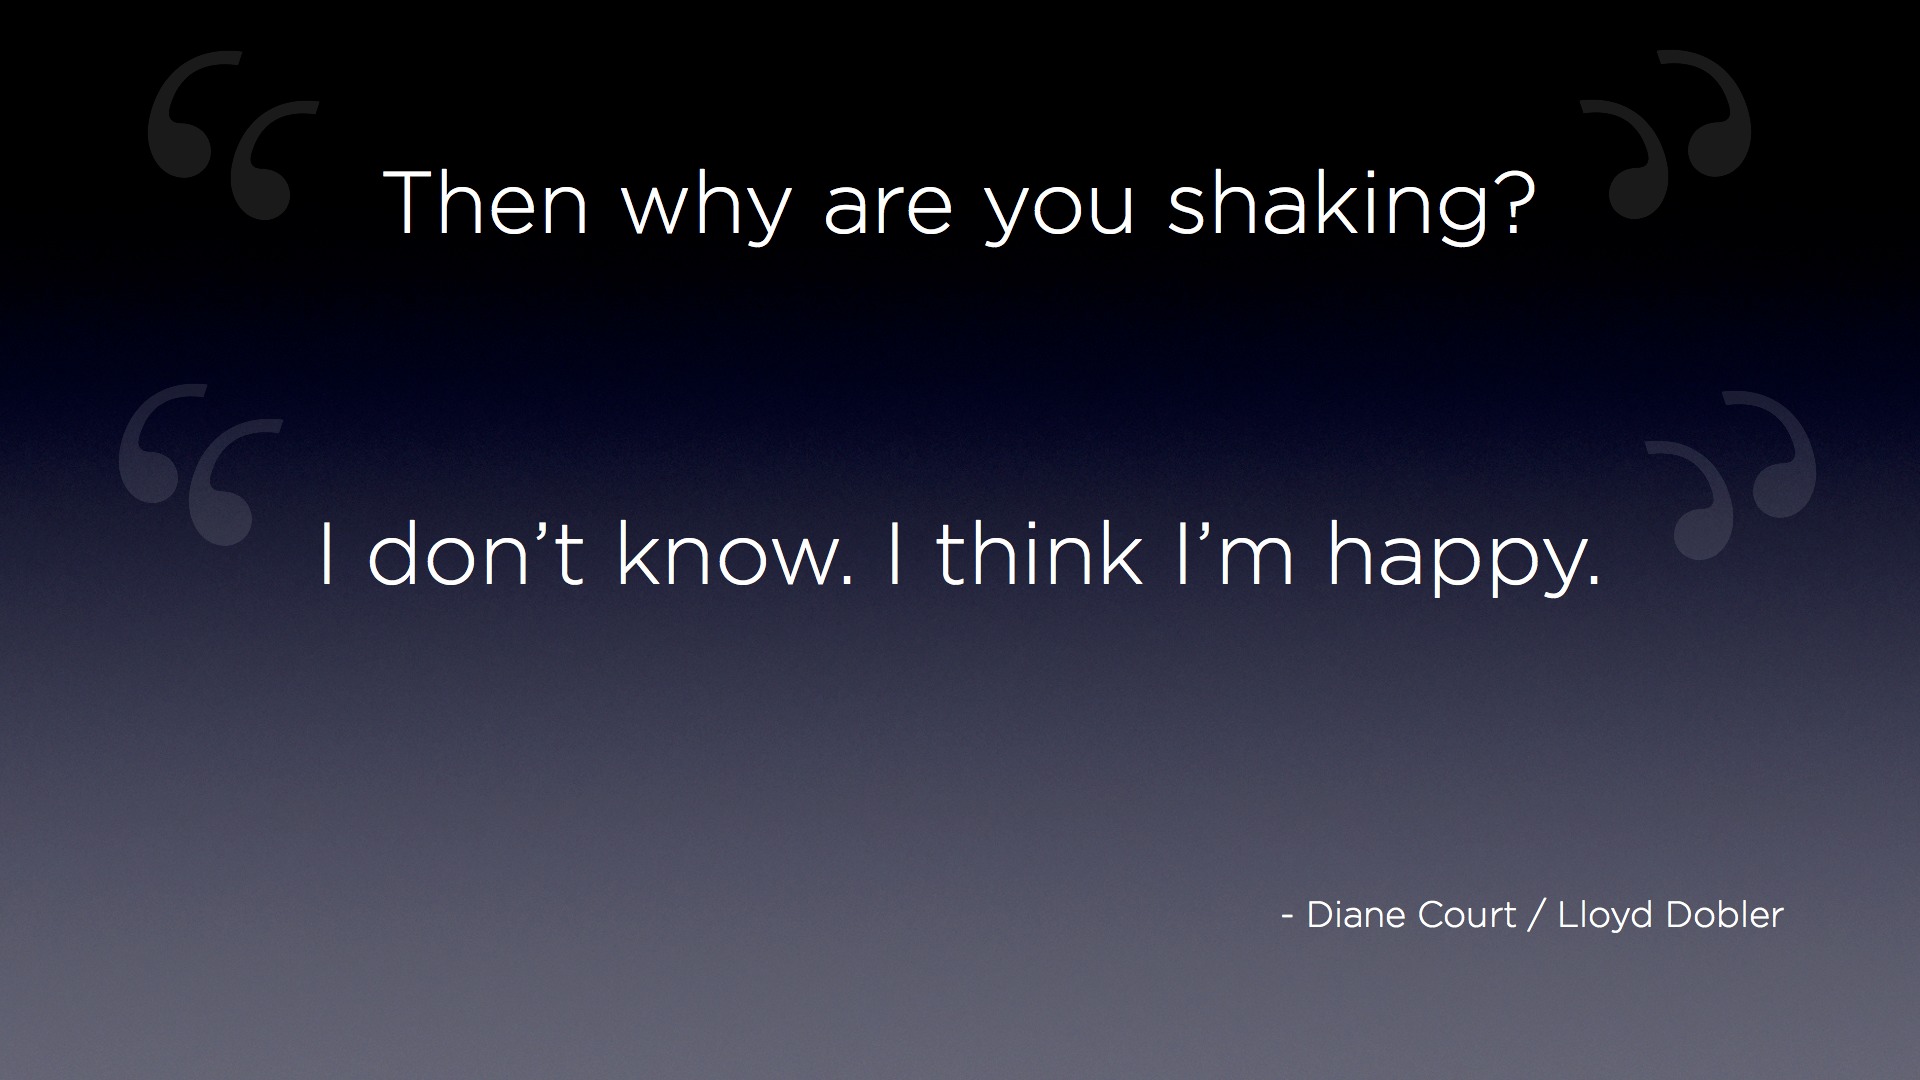 "Then why are you shaking?" "I don't know. I think I'm happy." - Diane Court / Lloyd Dobler